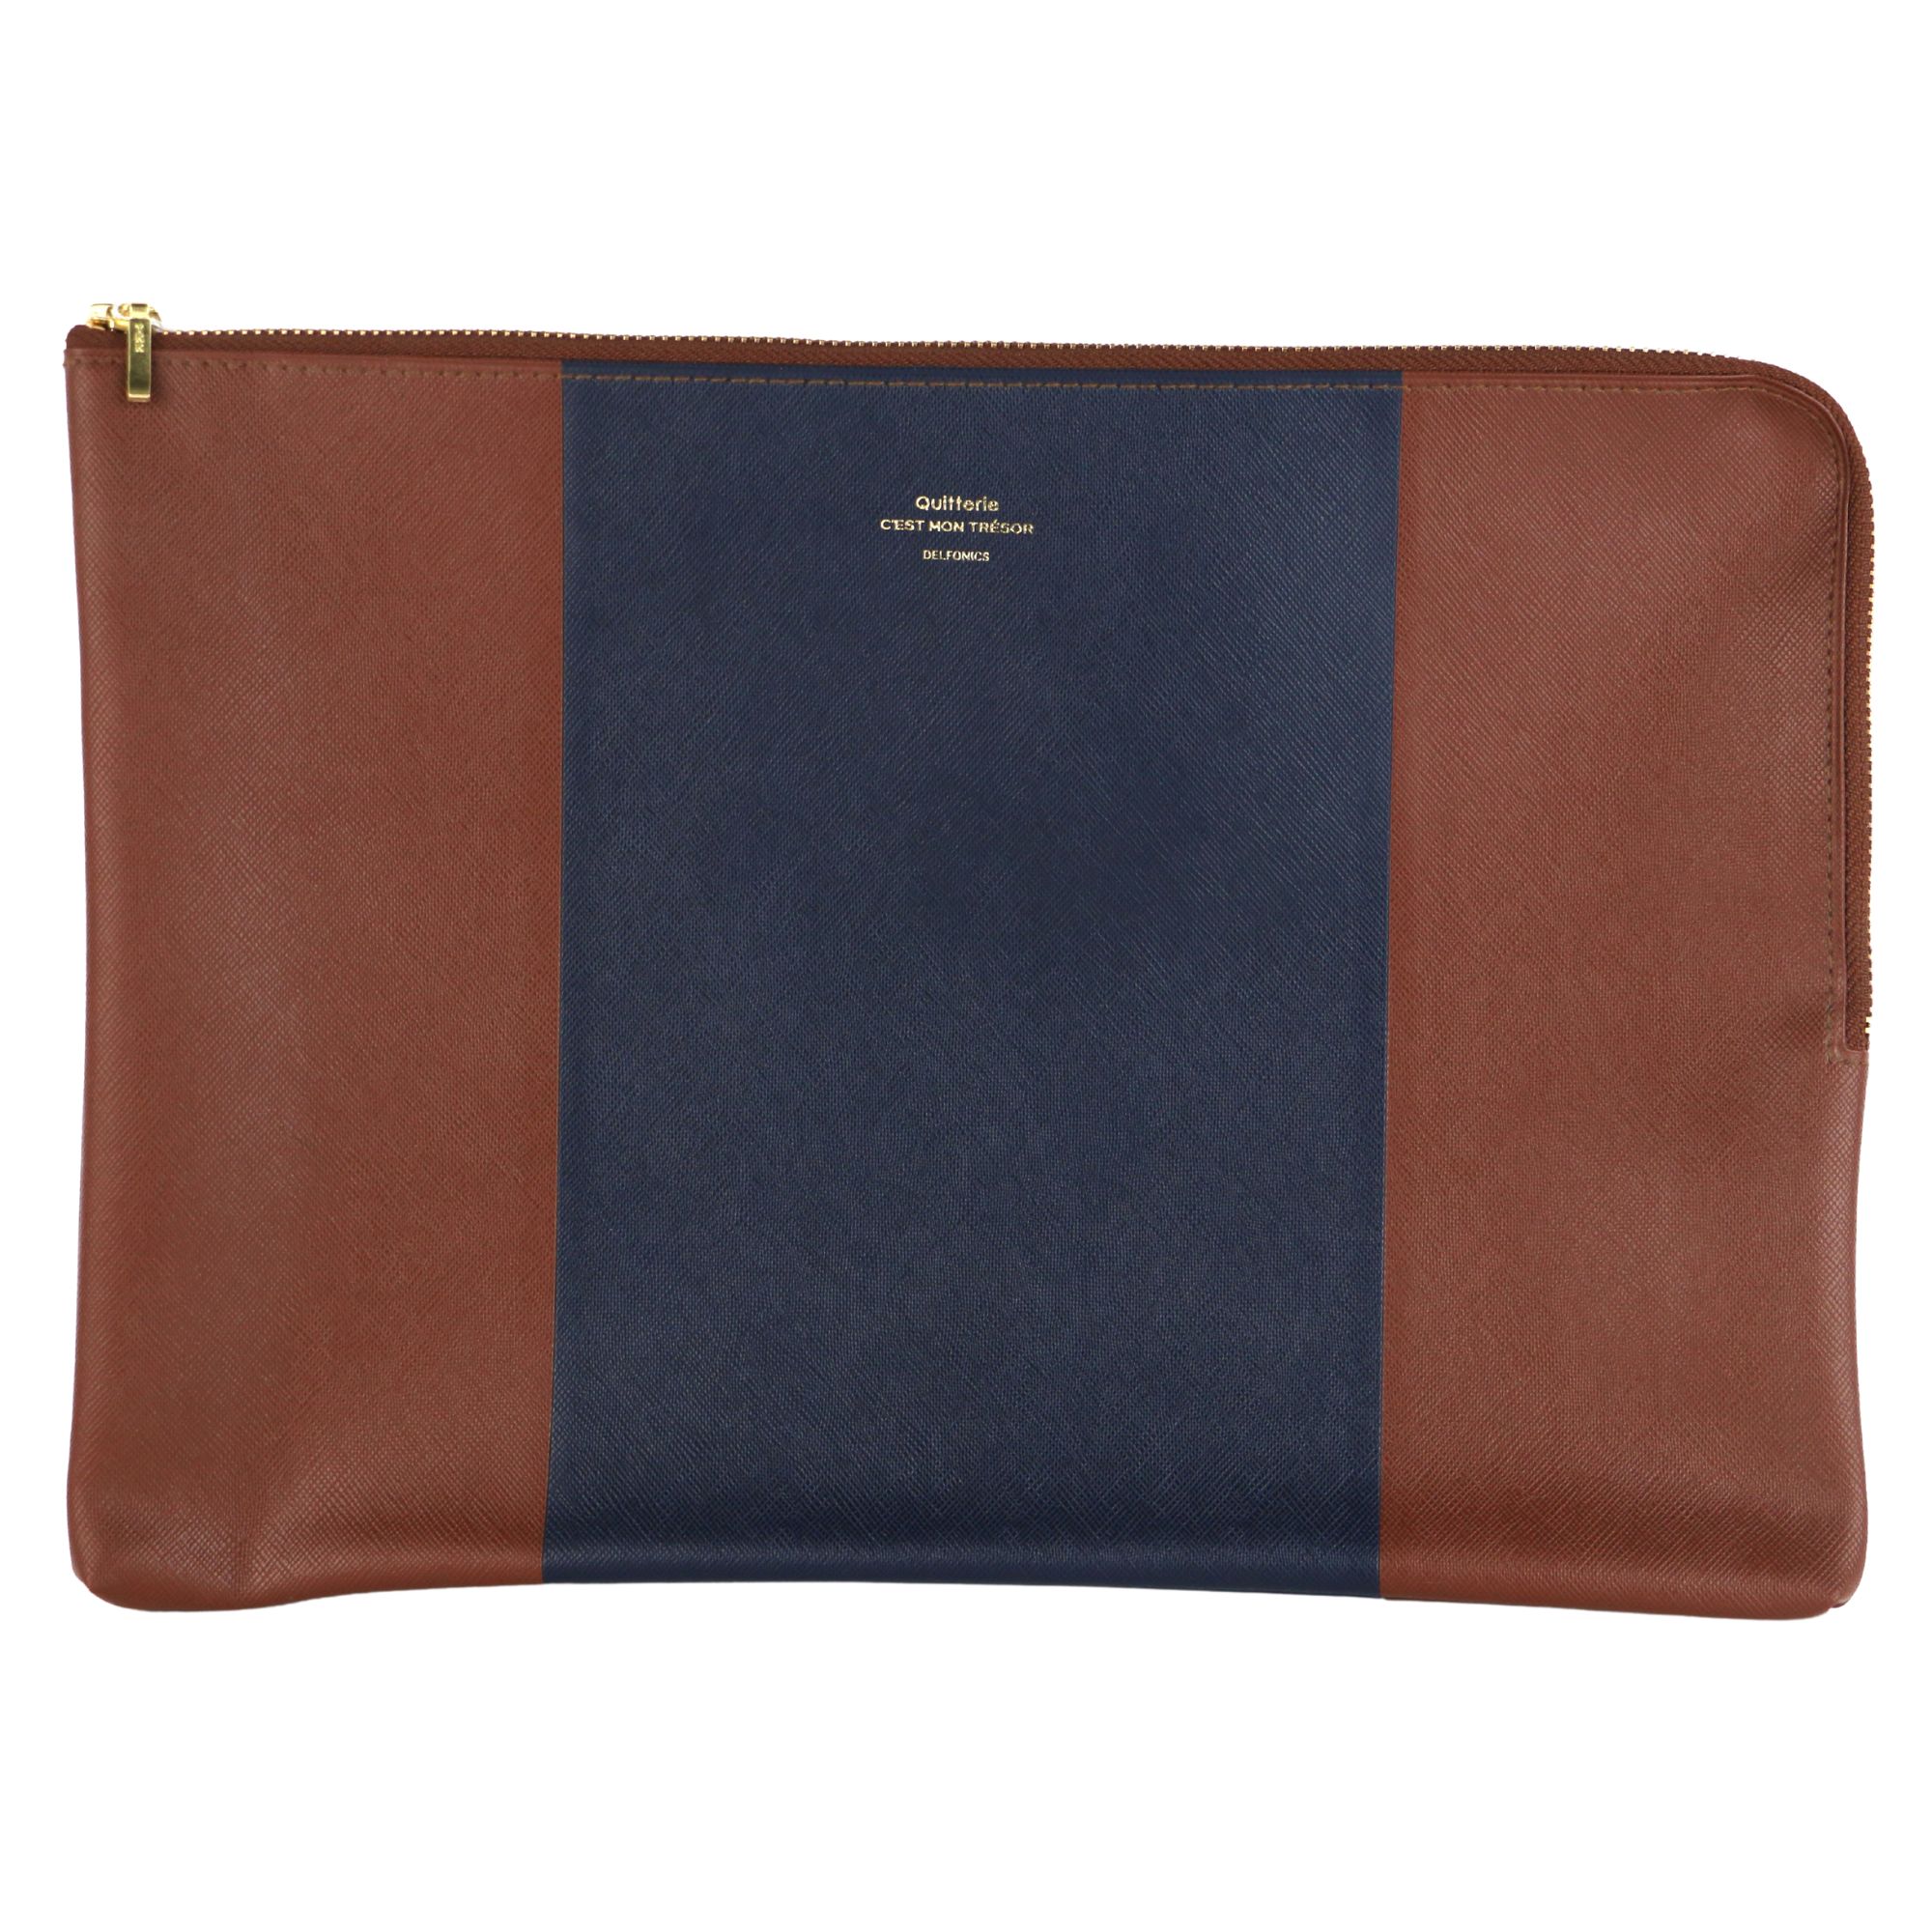 Delfonics Quitterie Tablet Carrying Case